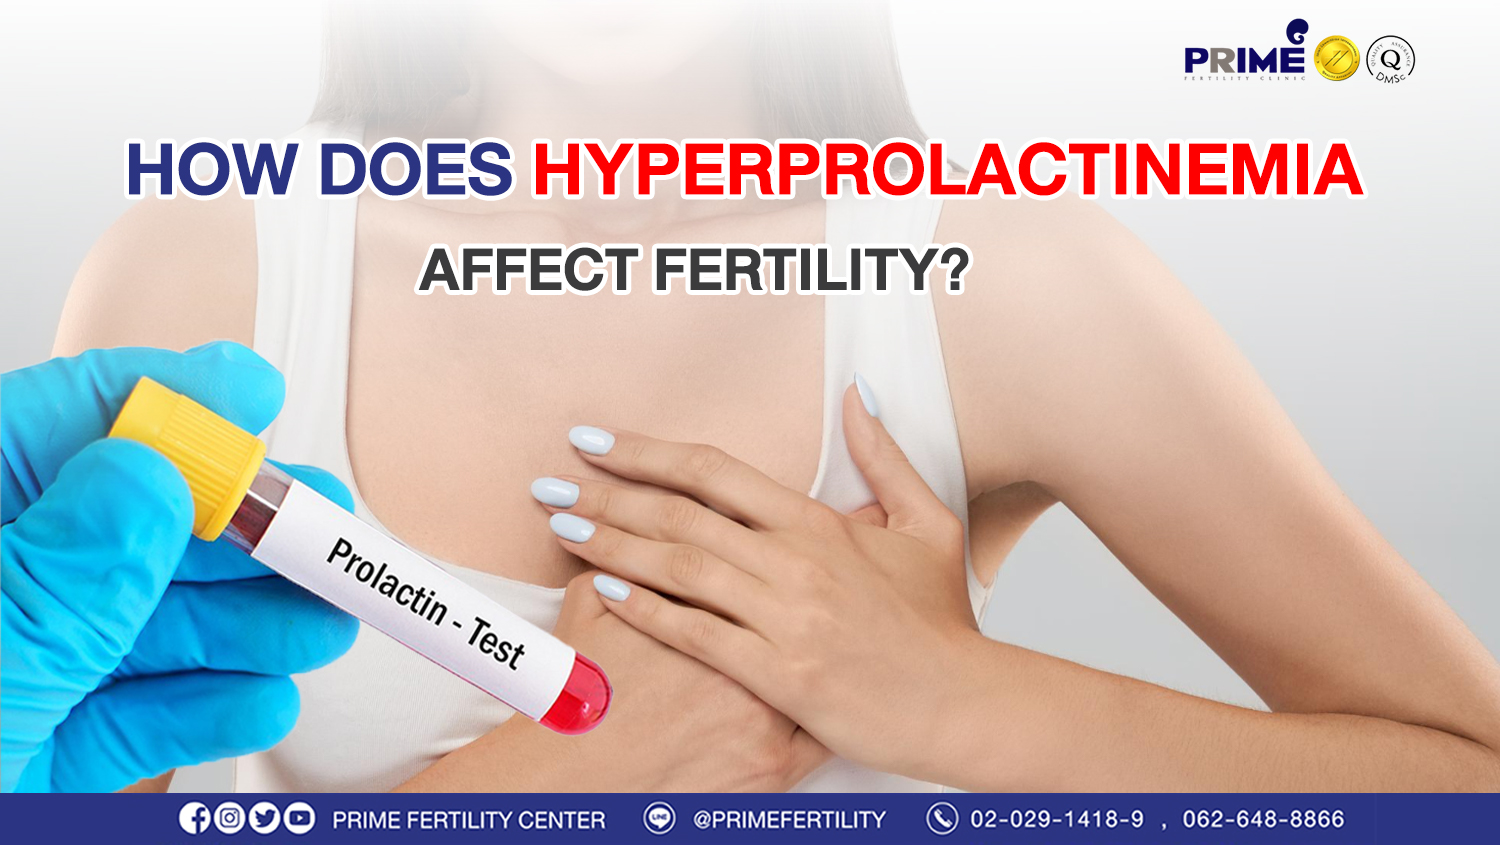 How does Hyperprolactinemia affect fertility?